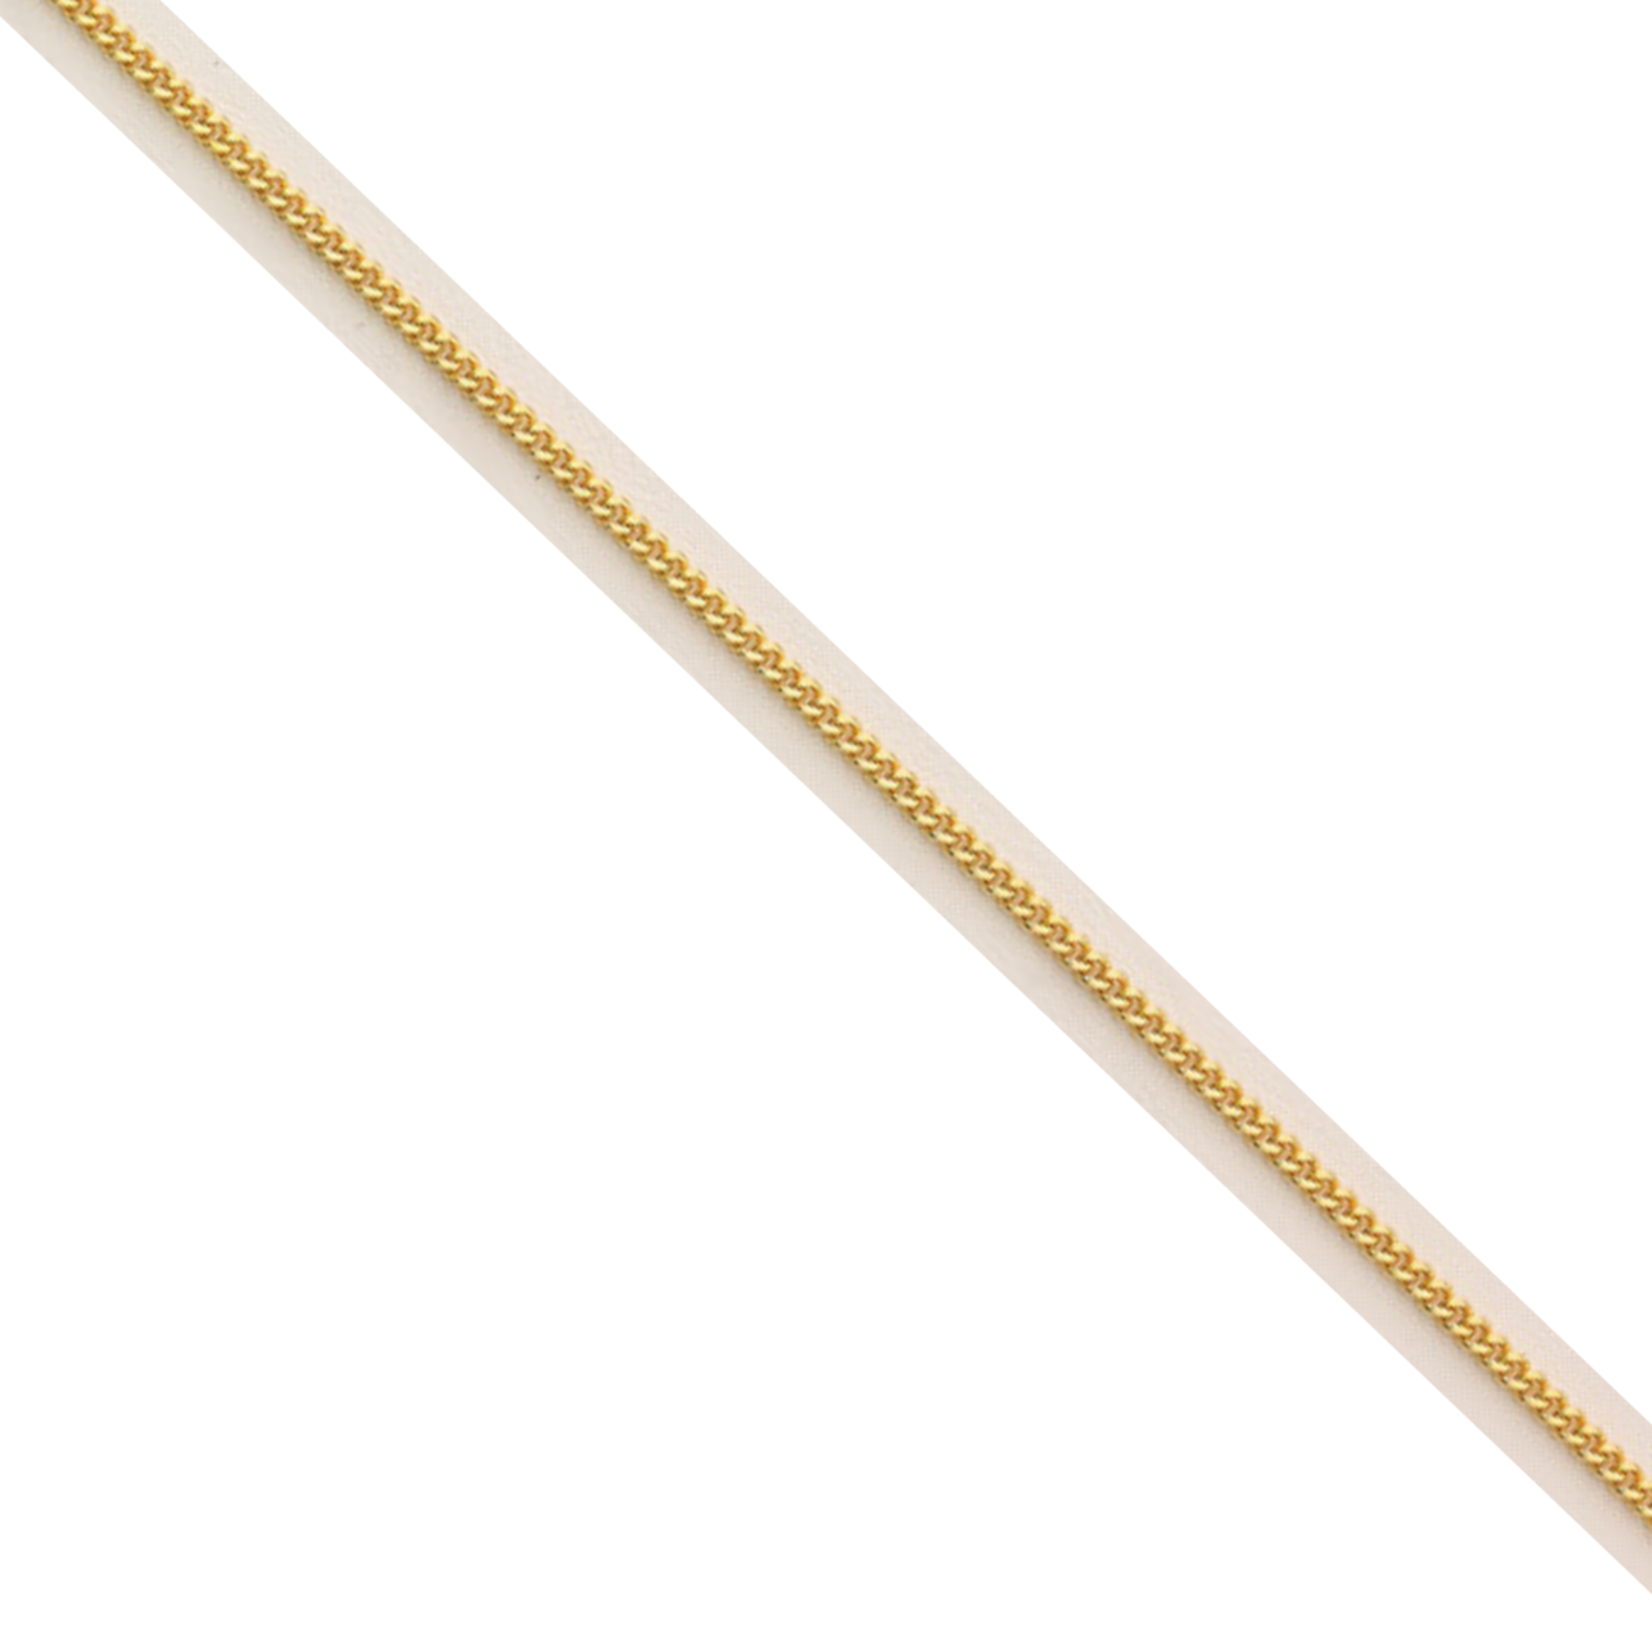 20" Gold Plate Chain with Clasp